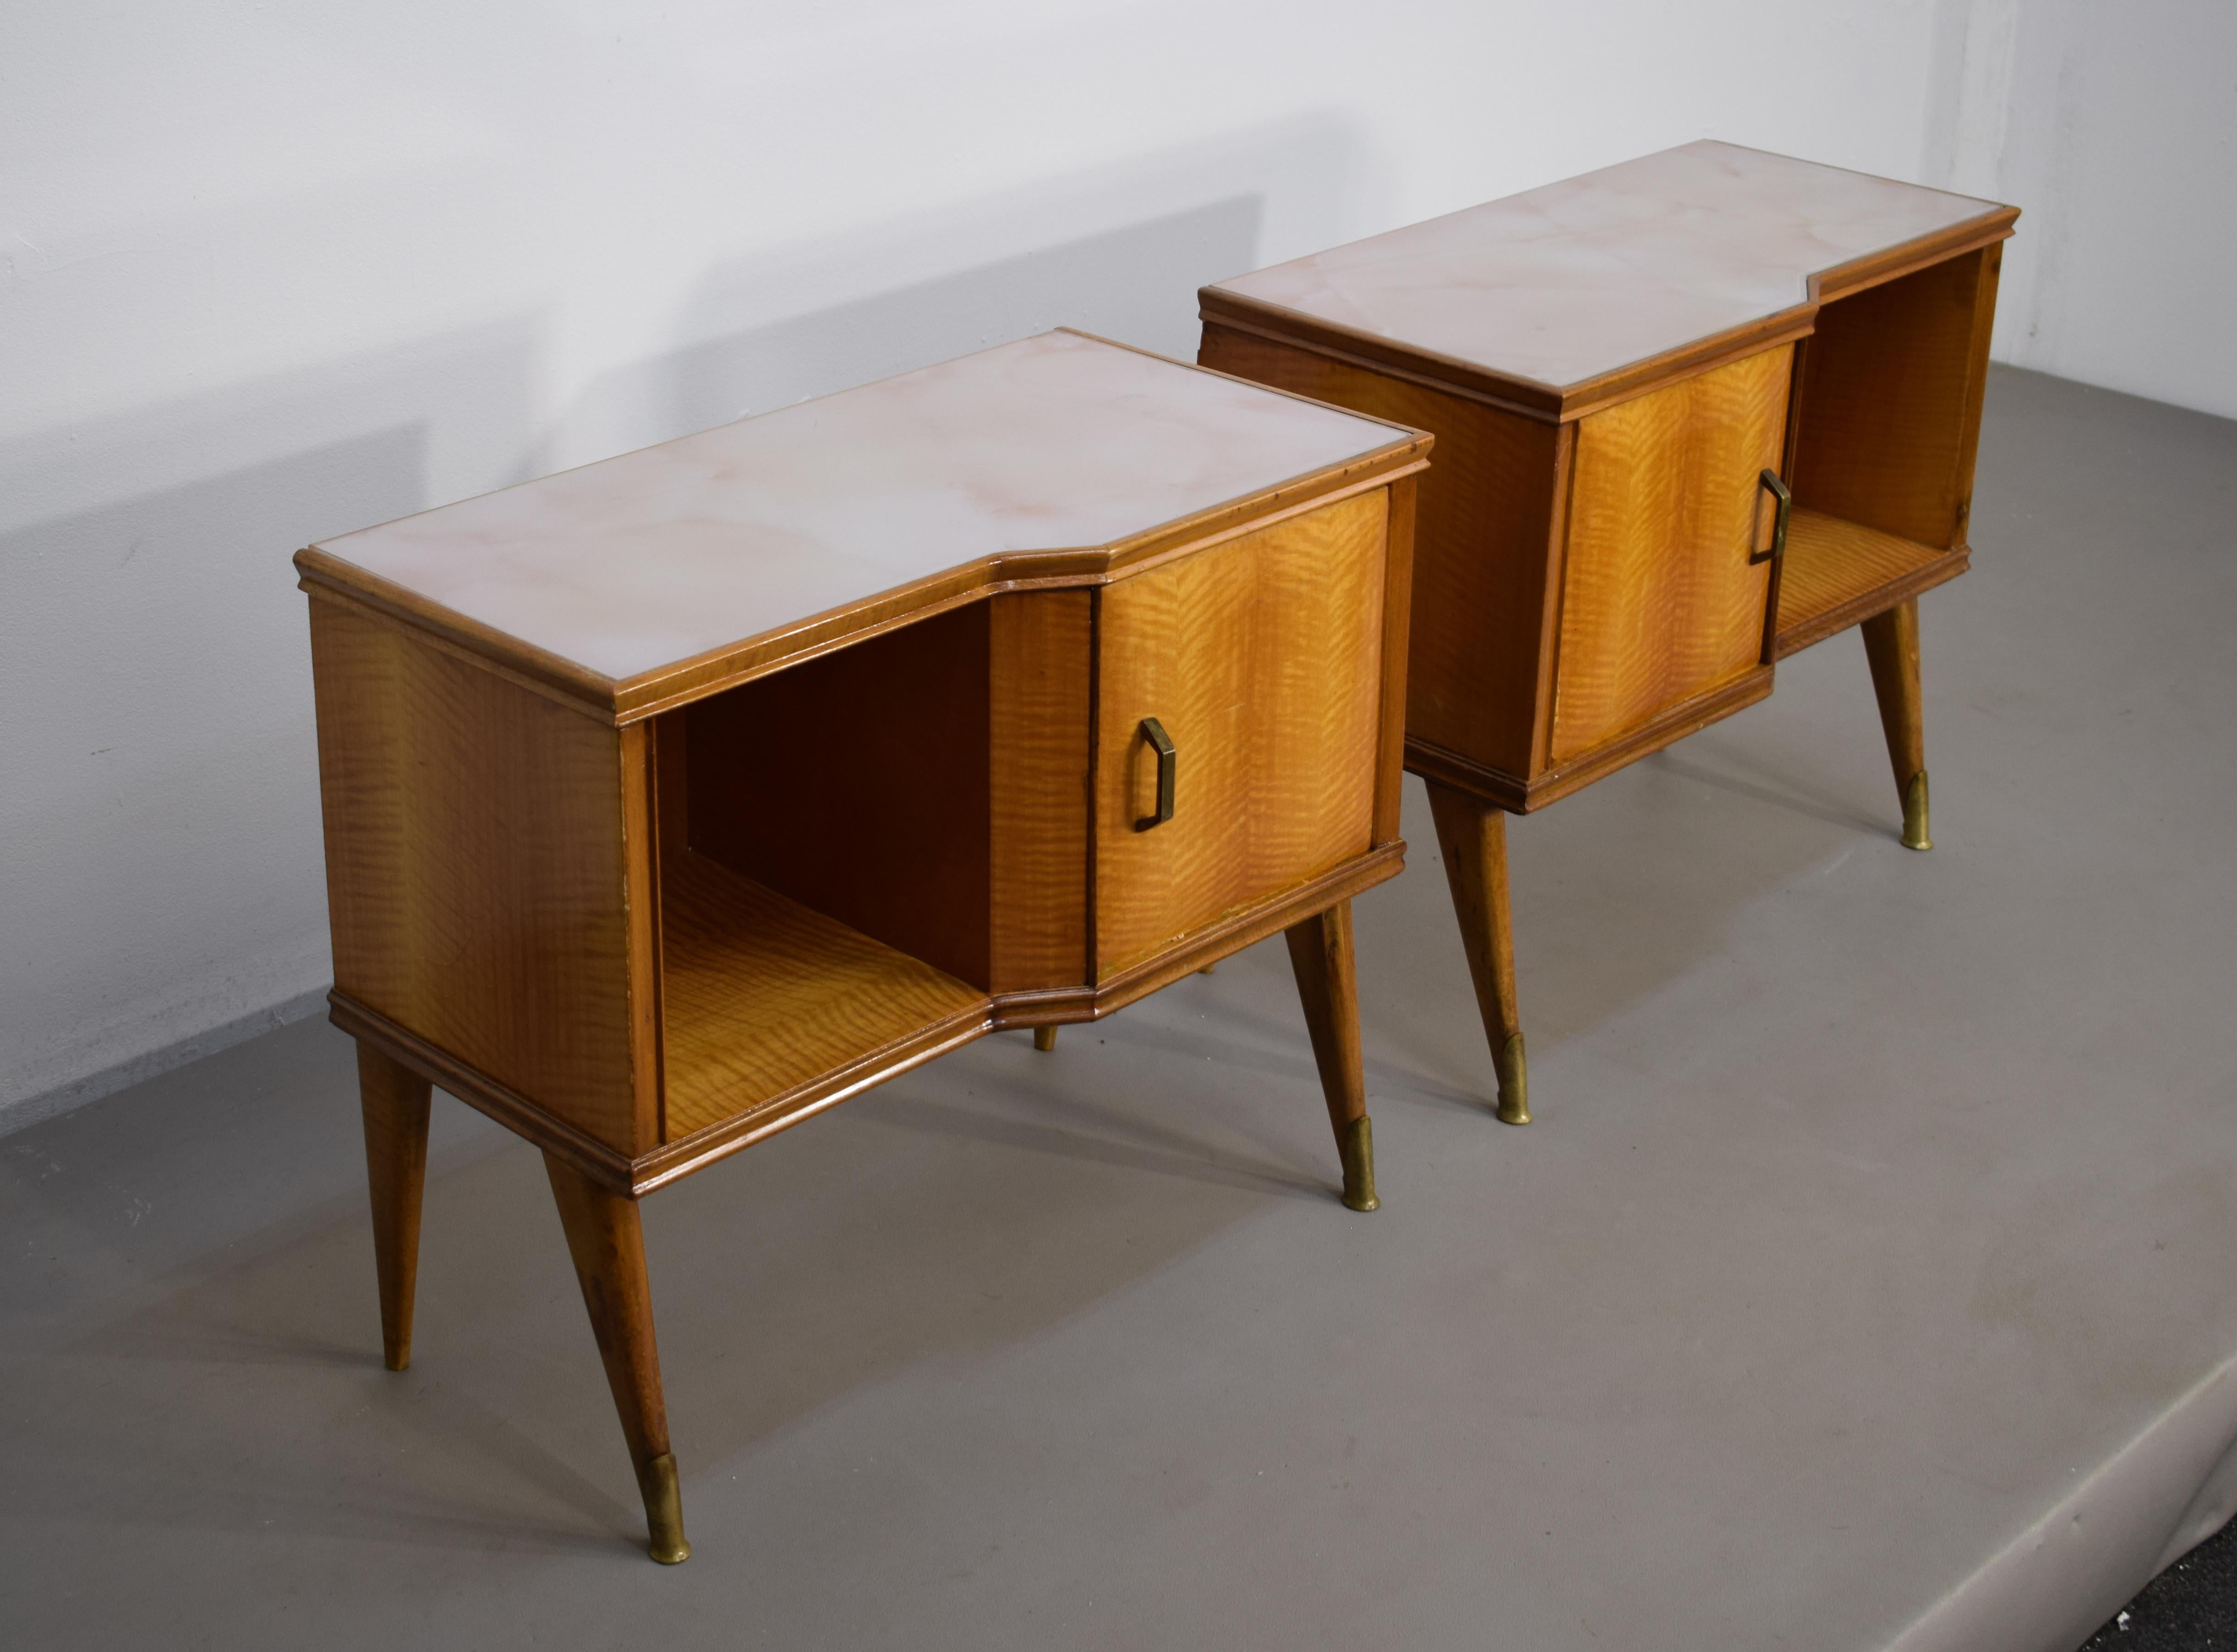 Pair of nightstands, Italy, 1950s.

Dimensions: H= 52 cm; W= 62 cm; D= 32 cm.